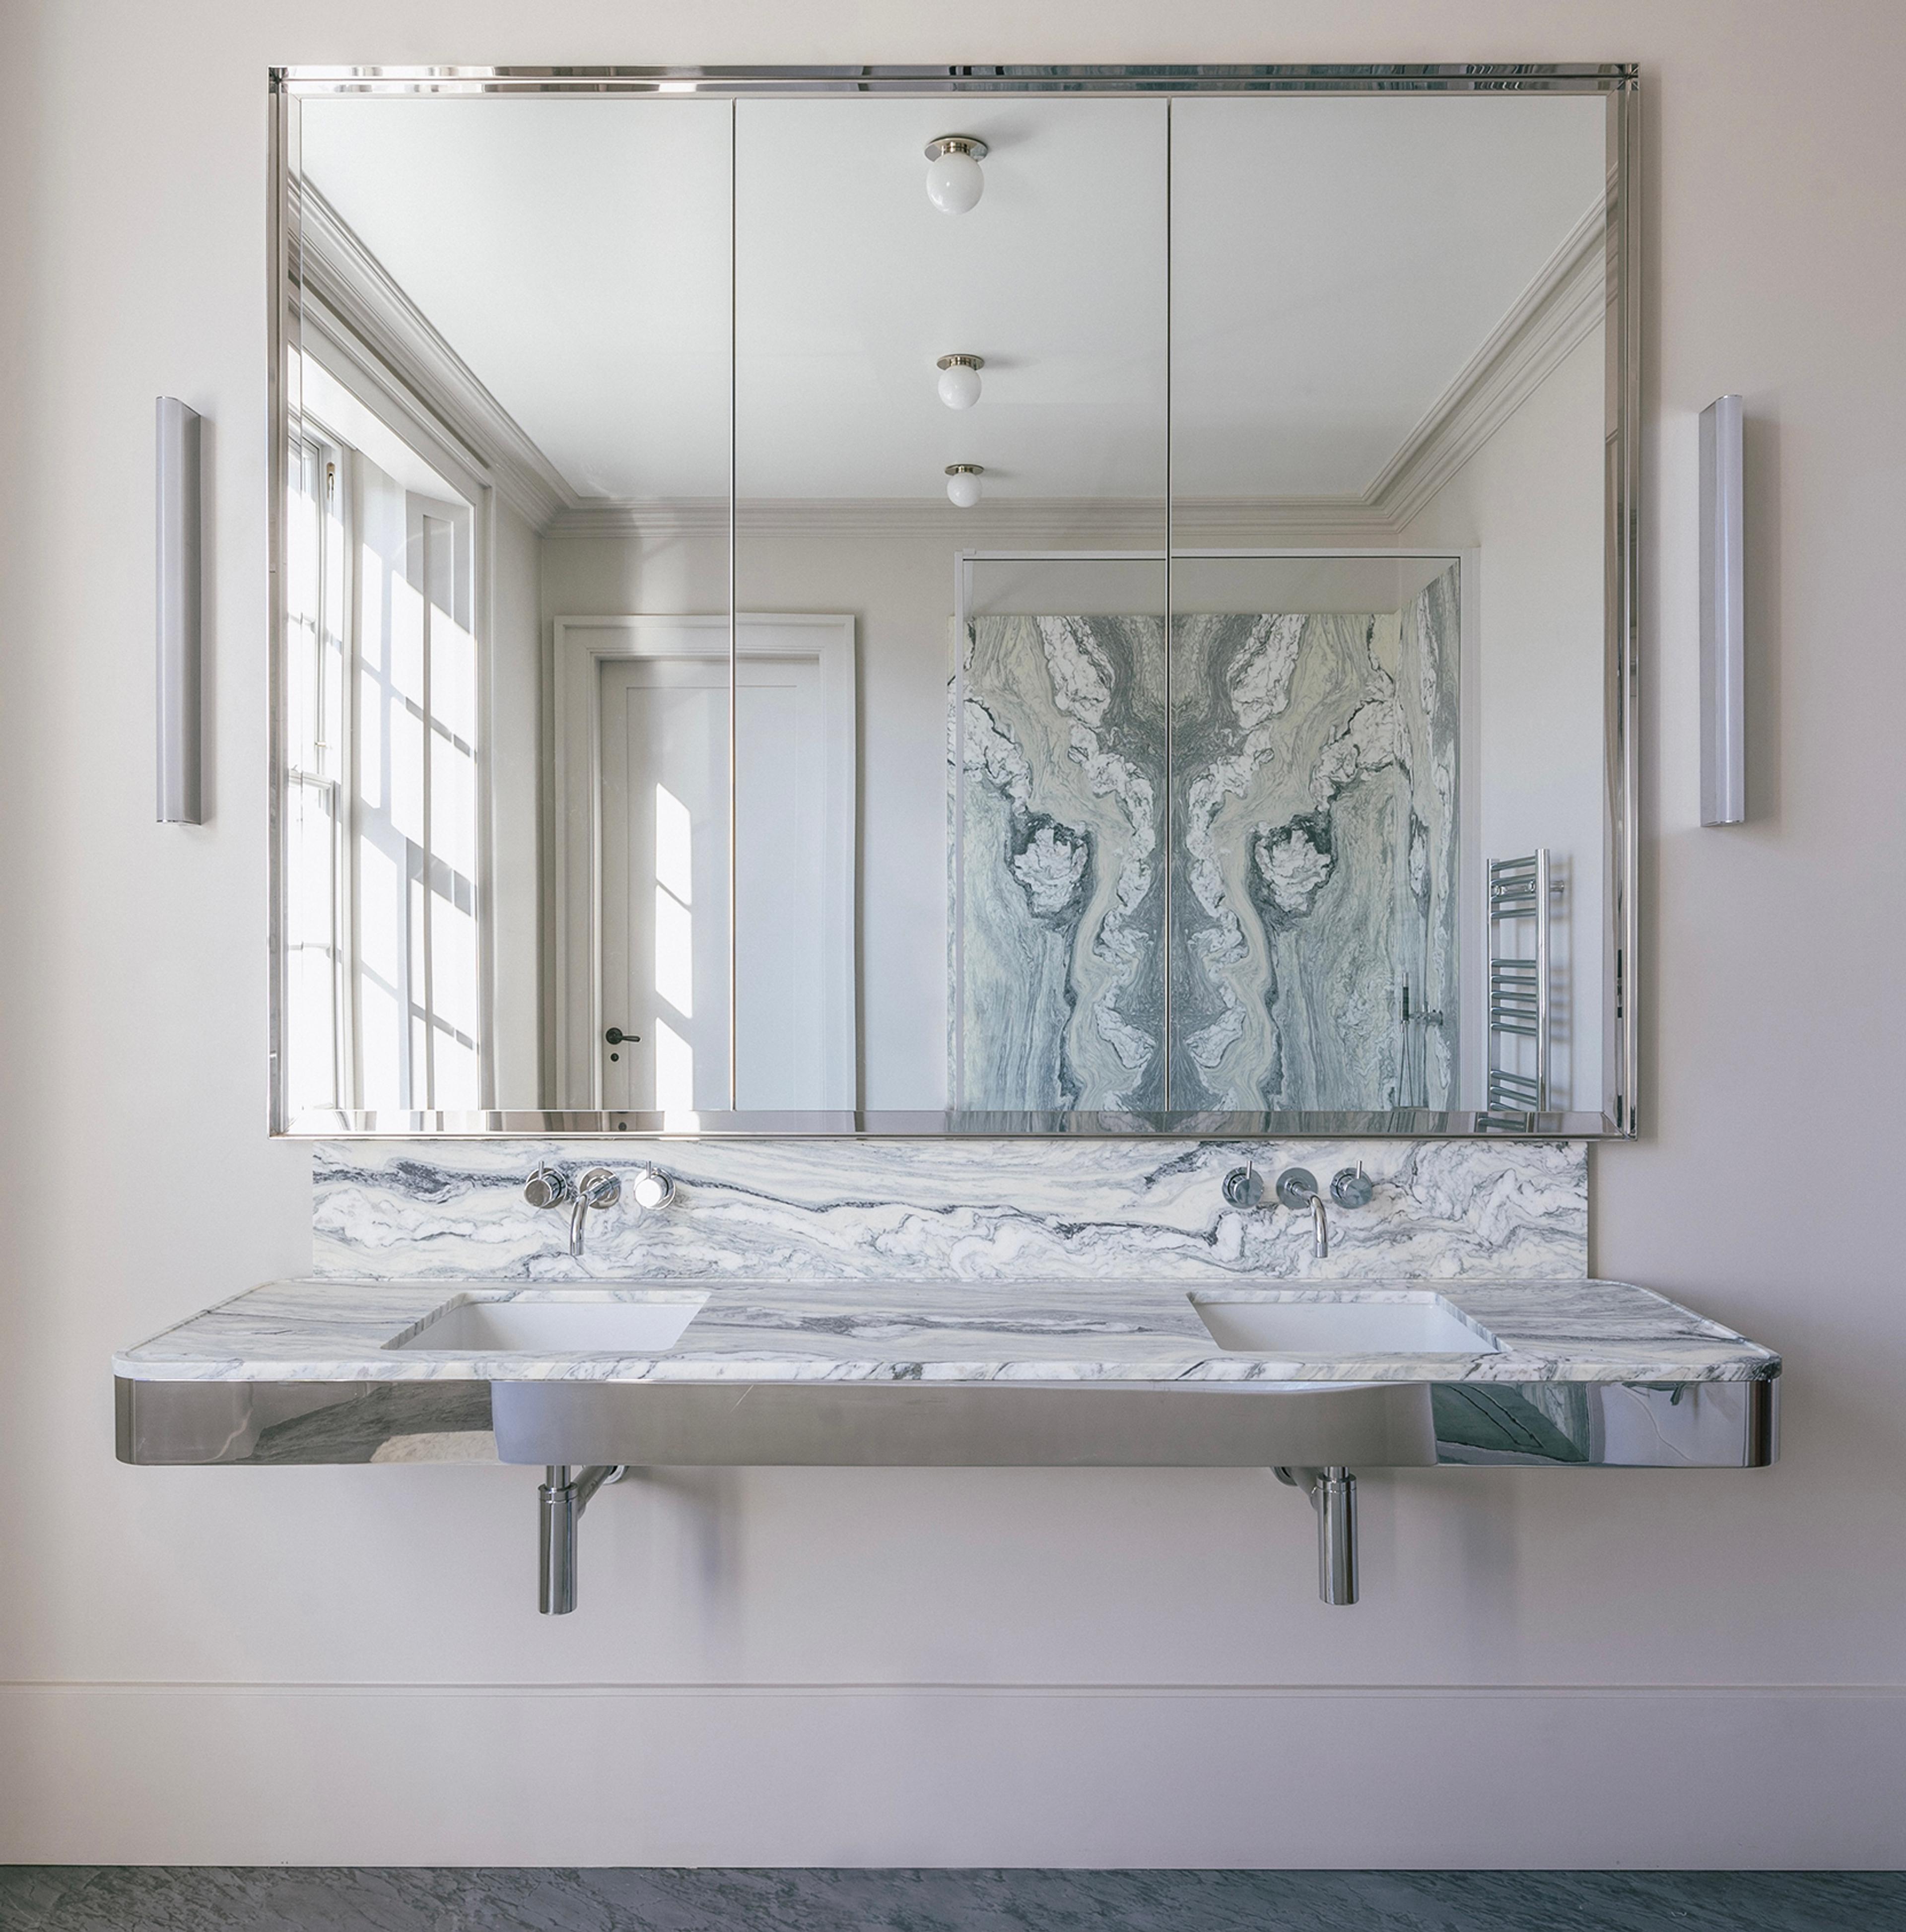 Stainless steel and marble vanity unit  Photo: Emily Marshall